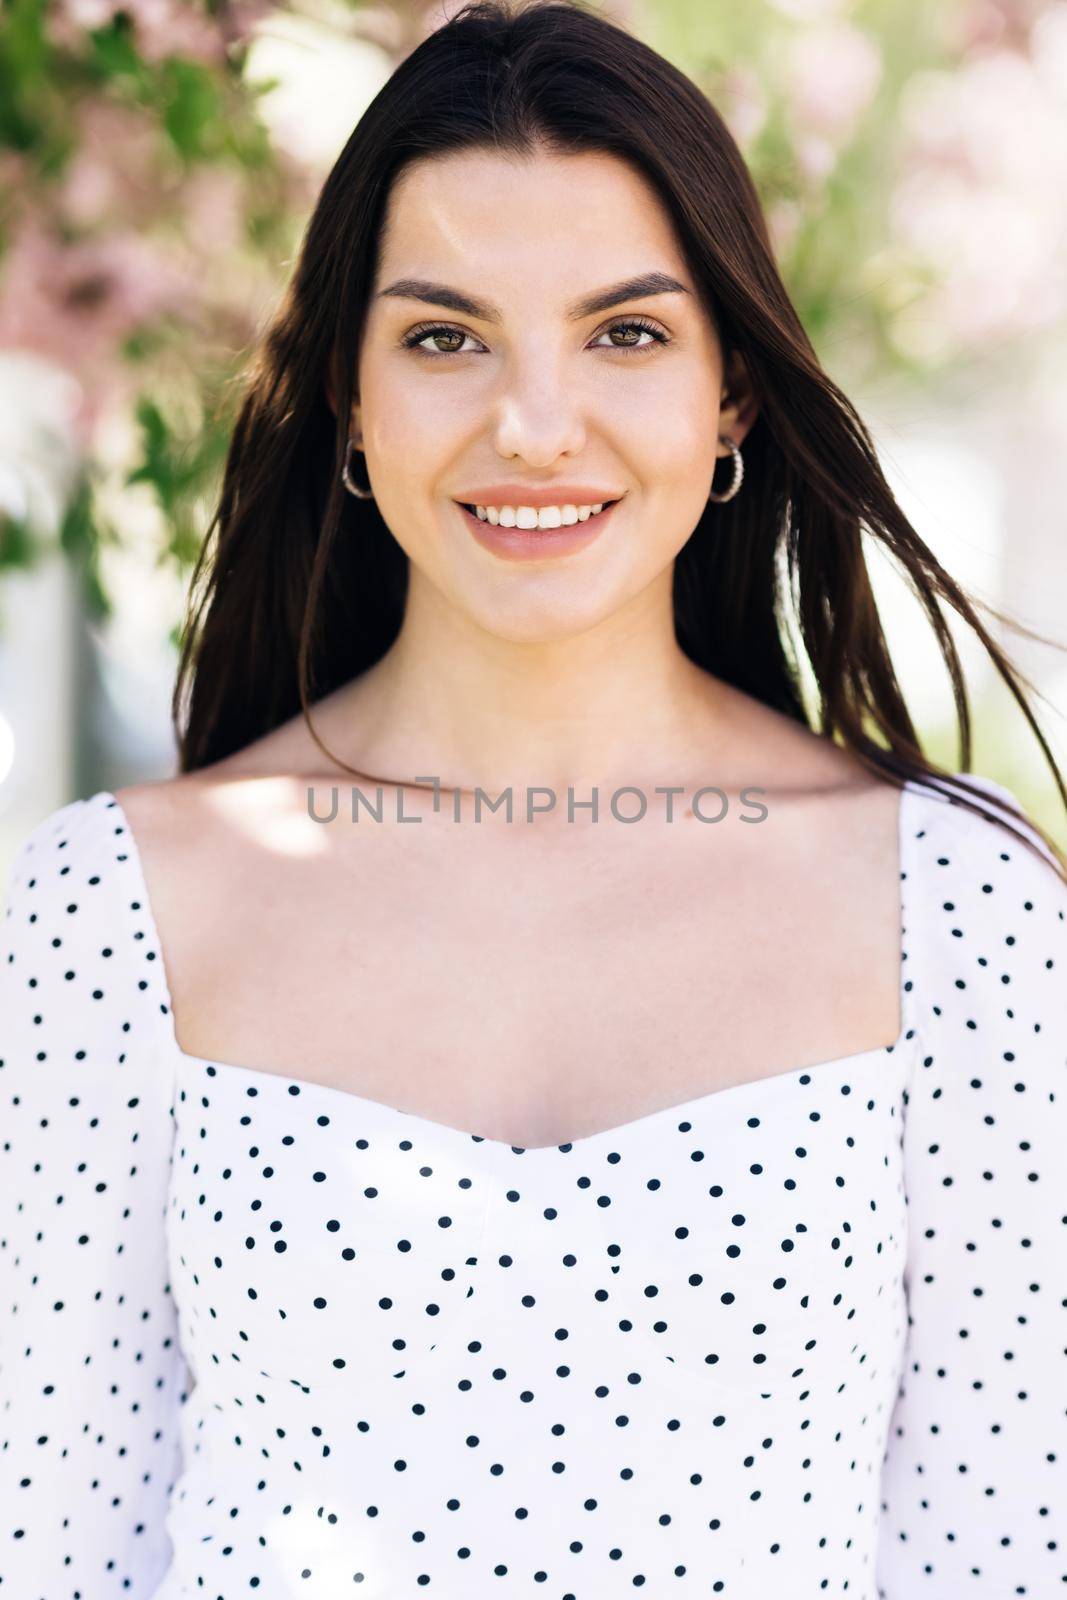 Beautiful Female with creative vivid makeup and pink lipstick on lips and hairstyle posing outside happy looking at camera. Close up portrait Smiling attractive young adult woman